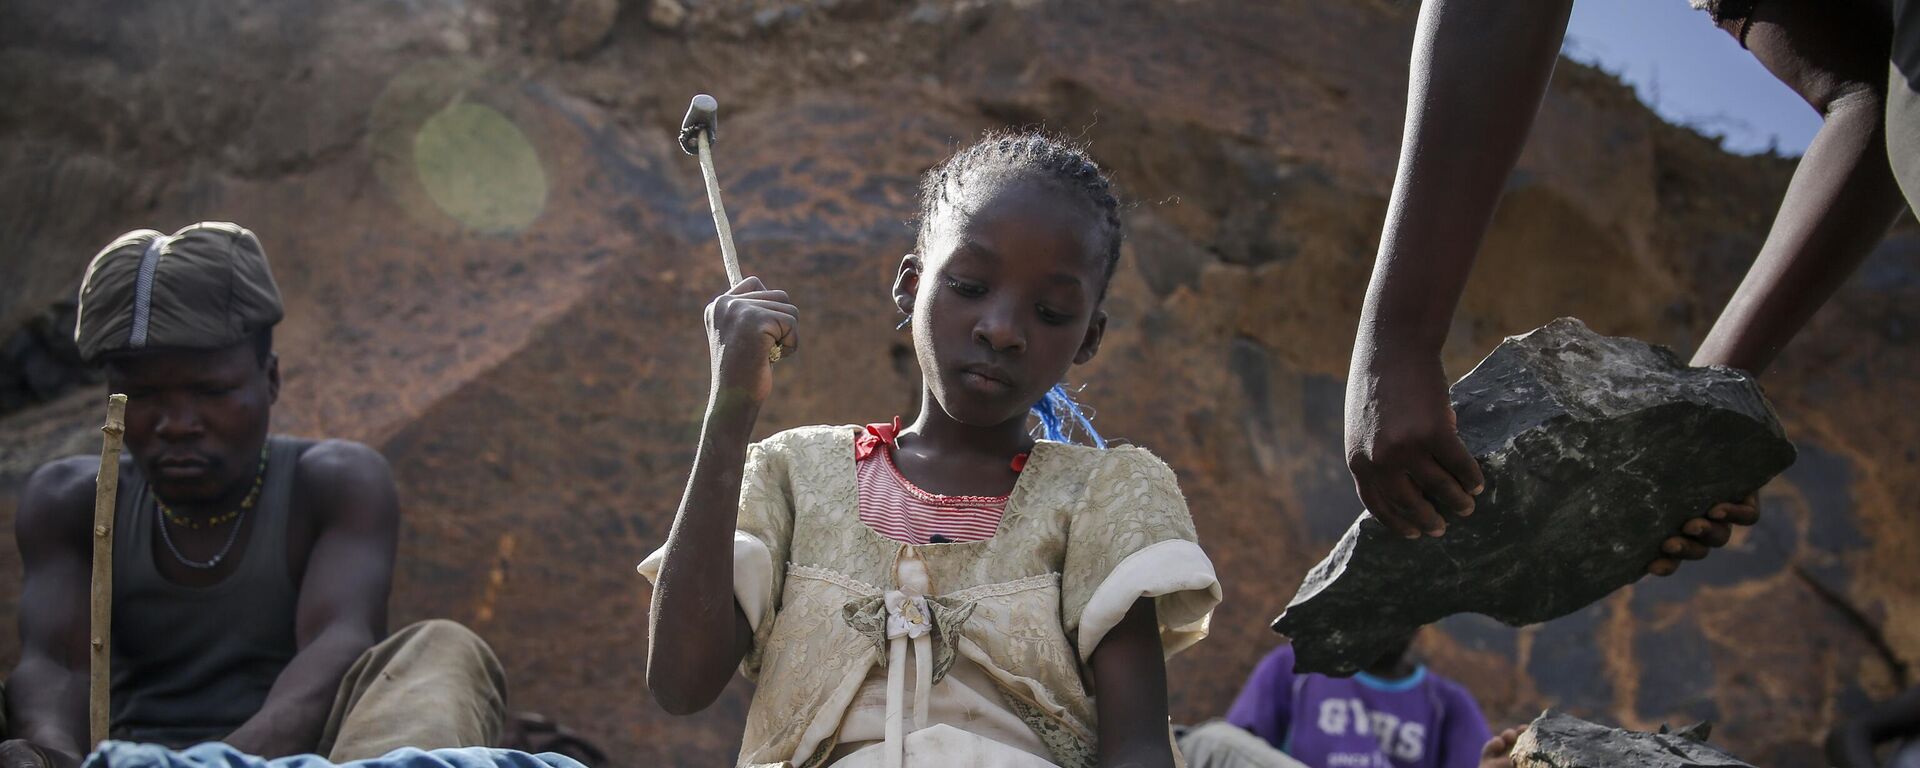 Irene Wanzila, 10, works breaking rocks with a hammer along with her younger brother, older sister and mother, who says she was left without a choice after she lost her cleaning job at a private school when coronavirus pandemic restrictions were imposed, at Kayole quarry in Nairobi, Kenya Tuesday, Sept. 29, 2020. - Sputnik Africa, 1920, 12.06.2024